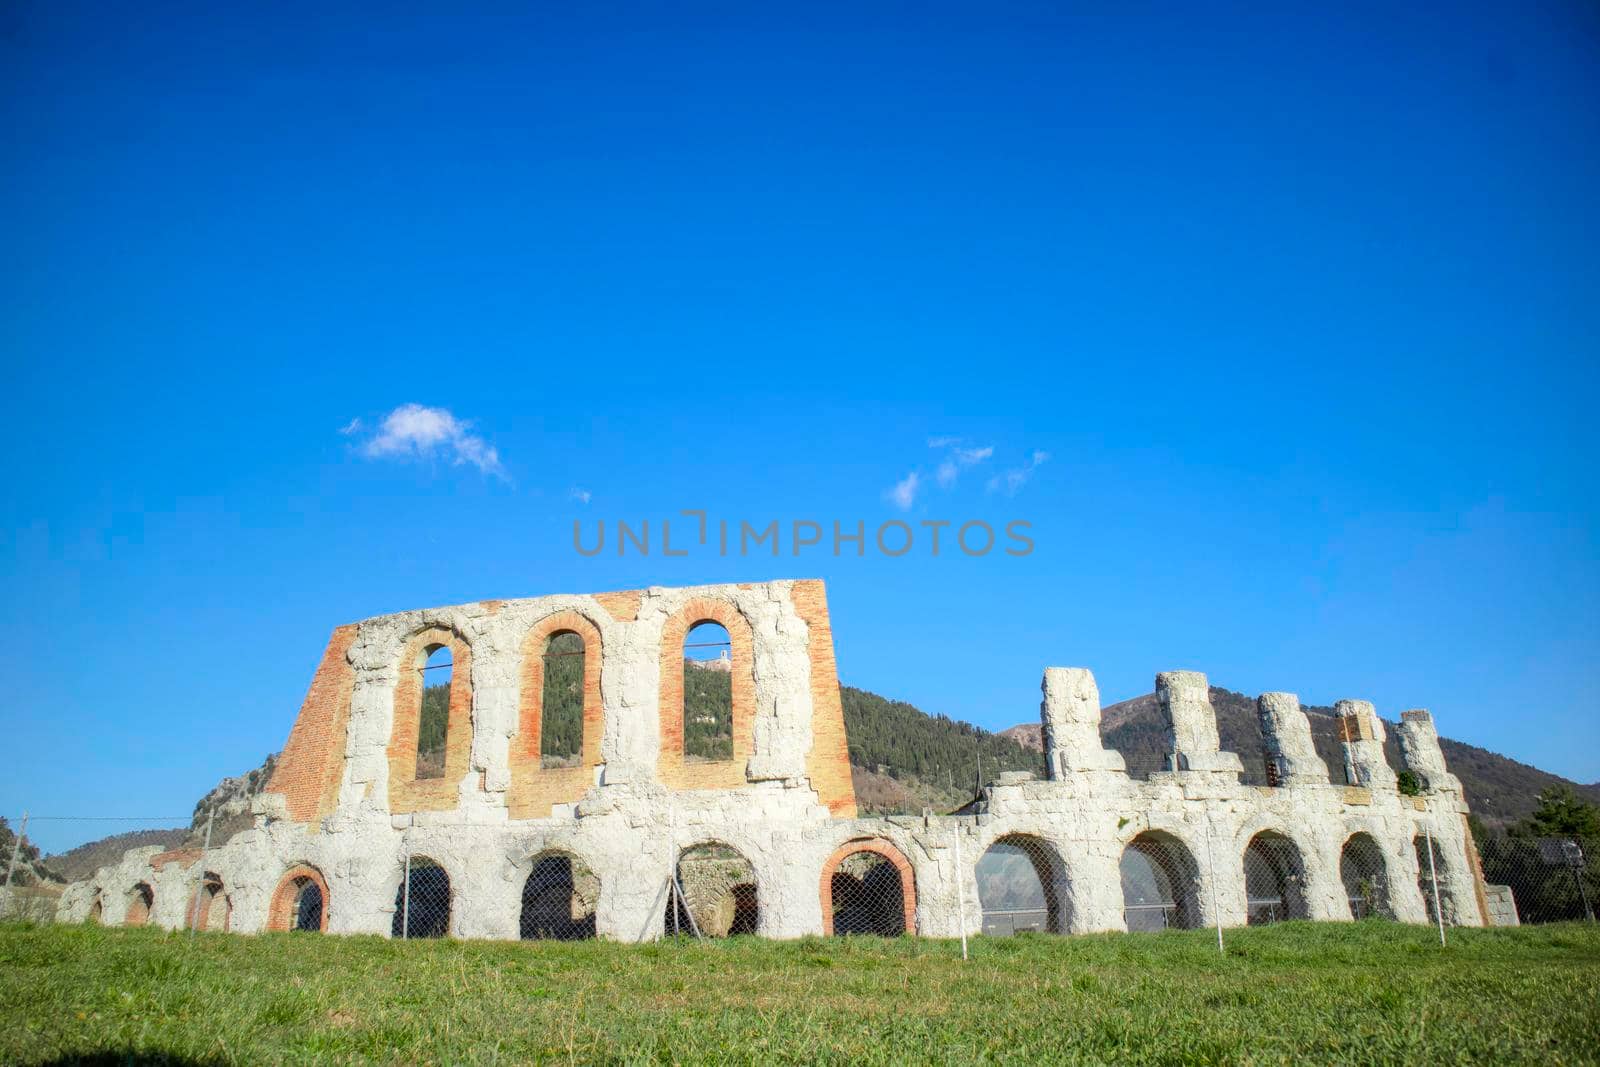 Photo shoot of the remains of the Roman amphitheater near Gubbio in Umbria Italy 